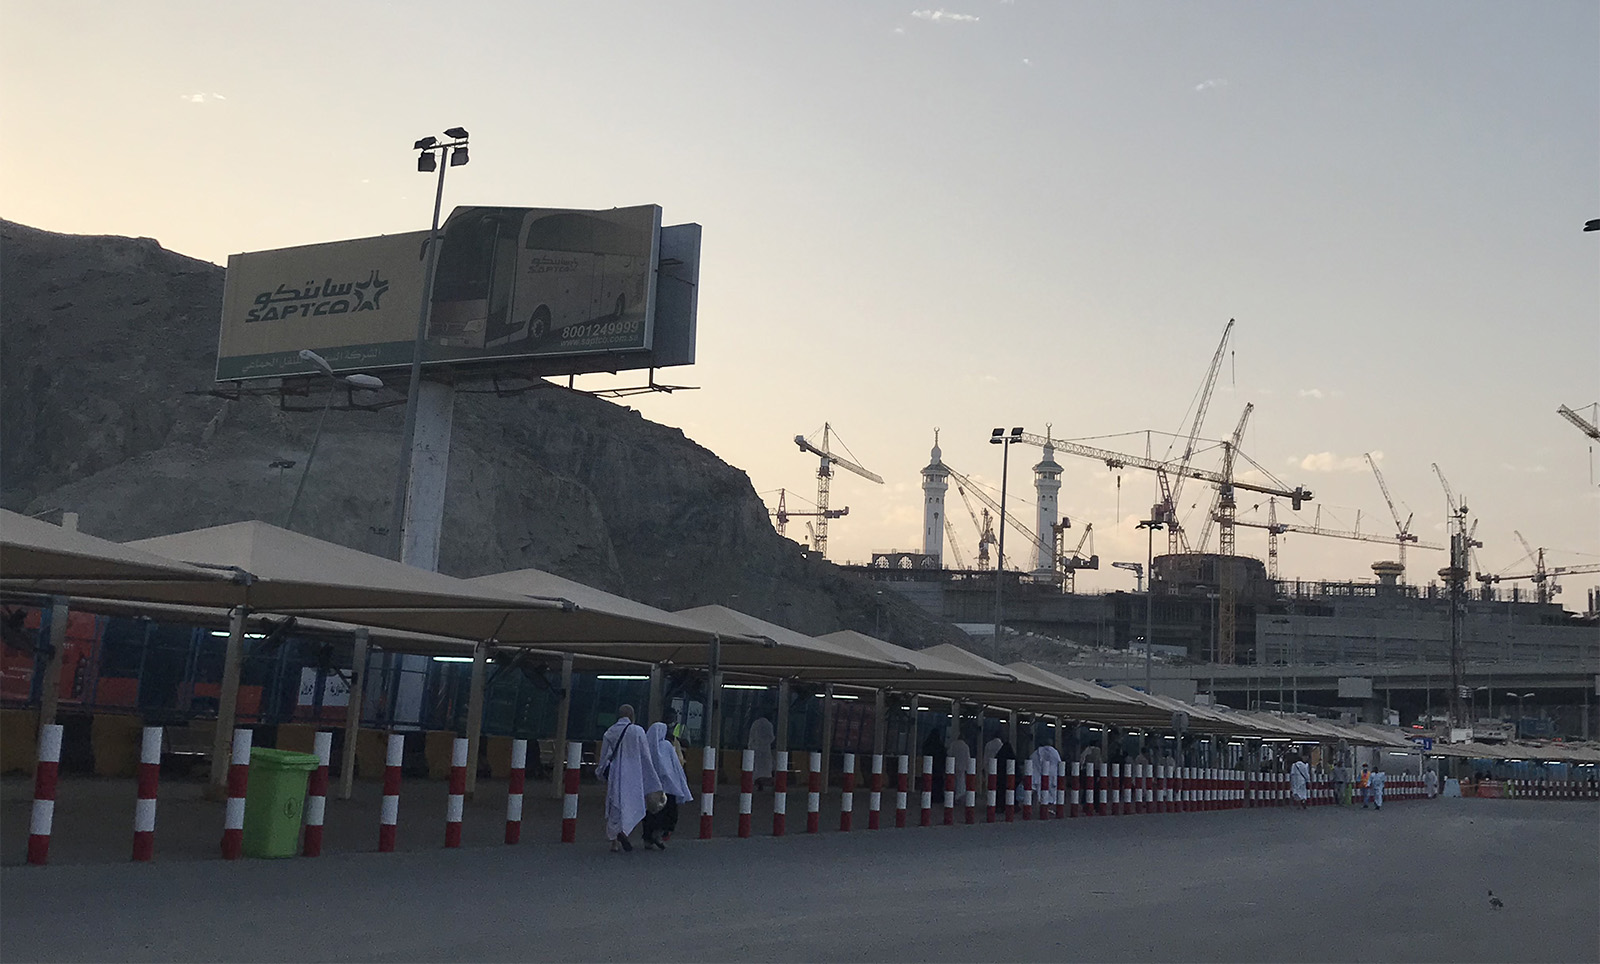 Pilgrims walk to the Grand Mosque one morning in mid-April, 2022, in Mecca, Saudi Arabia. A Grand Mosque expansion project can be seen in the background. Photo by Rabiya Jaffery